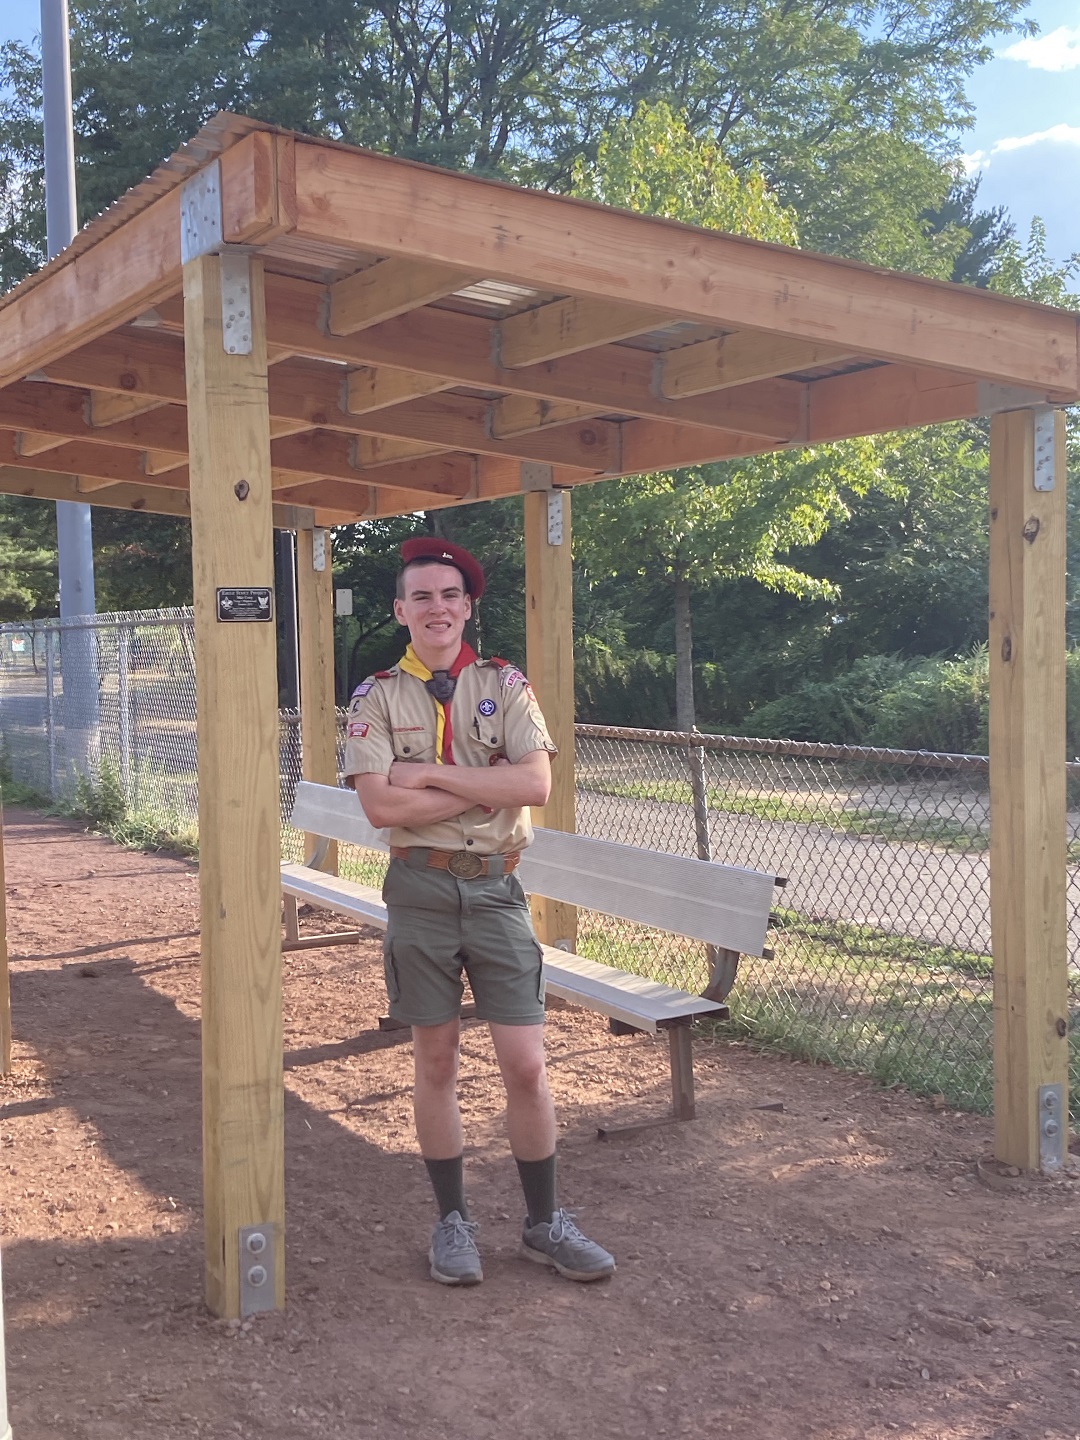 Completed boy scout dug out project using Simpson Strong-Tie hardware